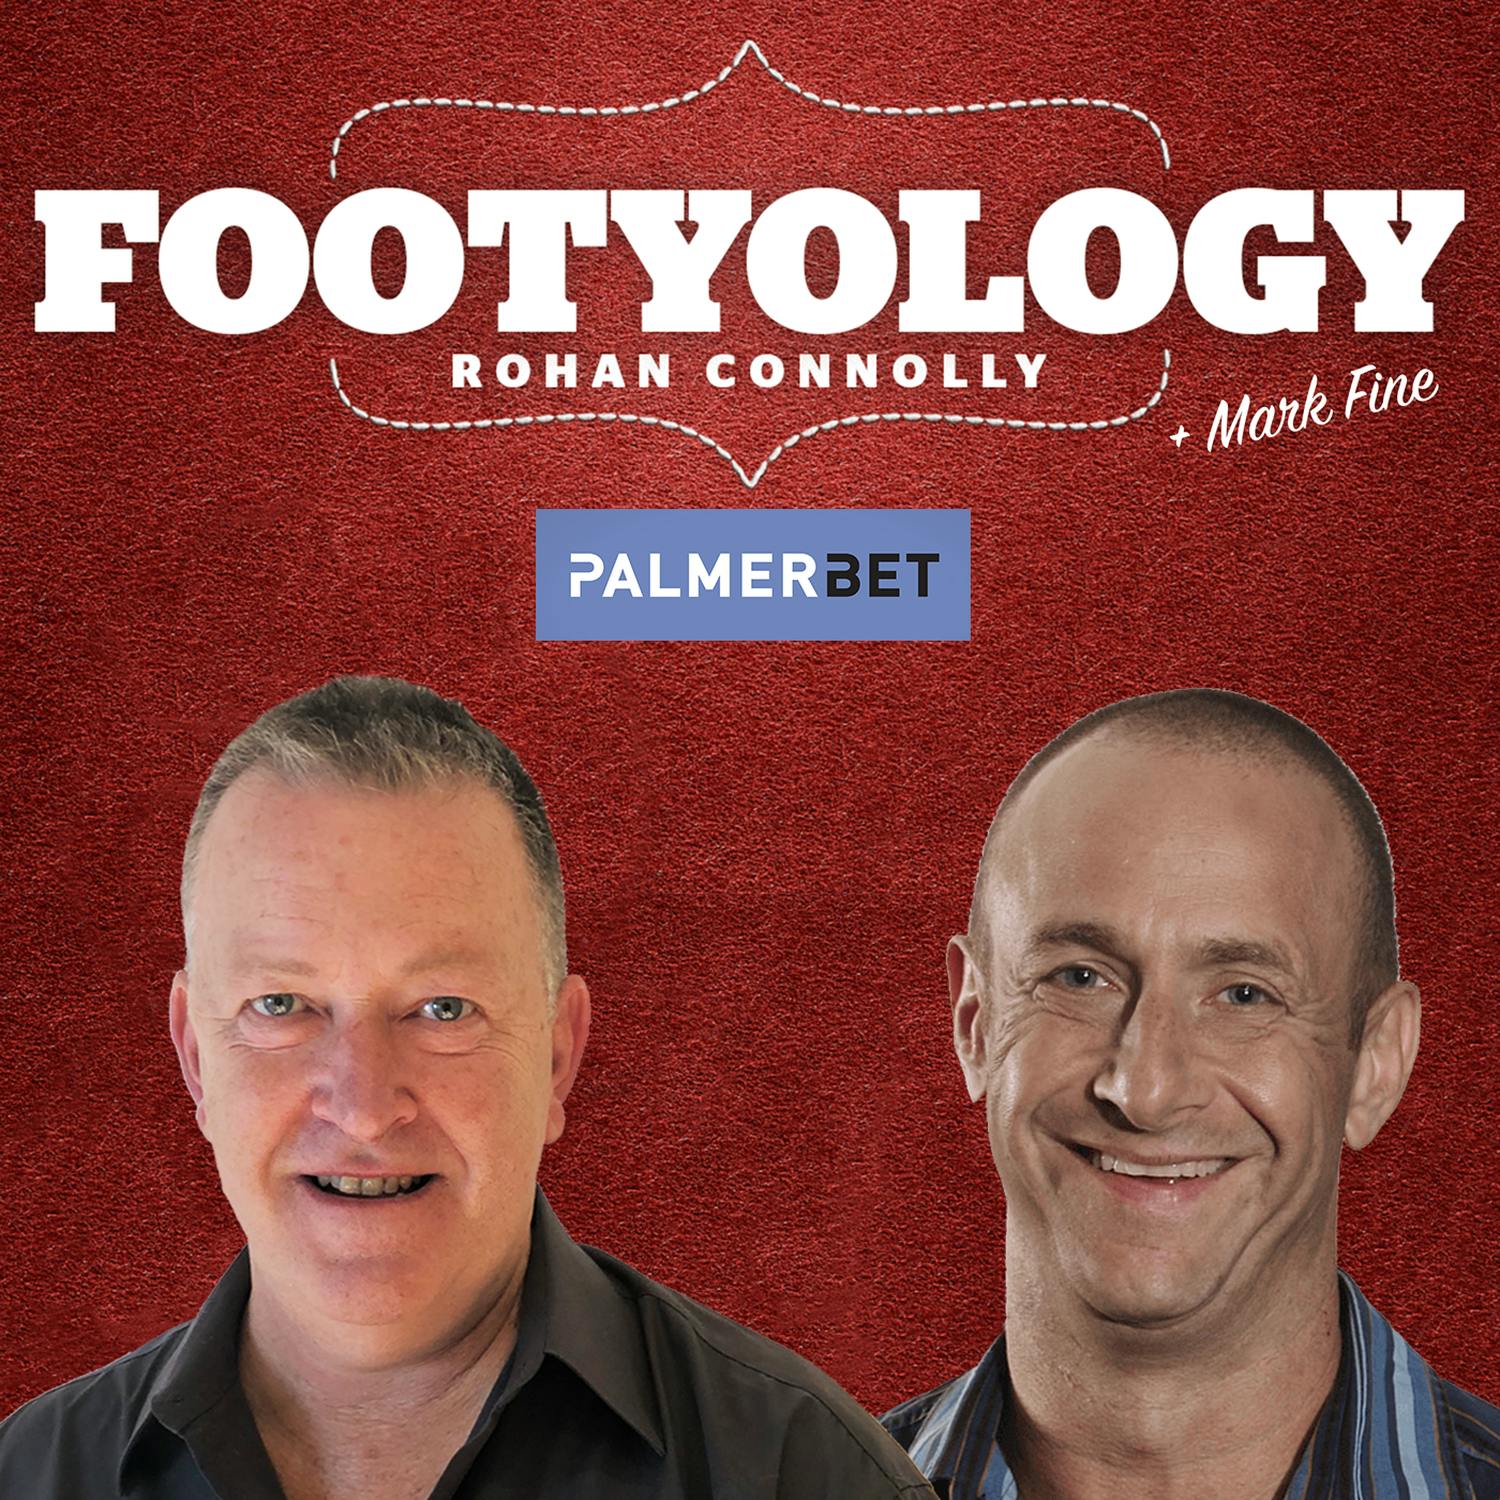 Footyology Podcast - February 23rd 2022